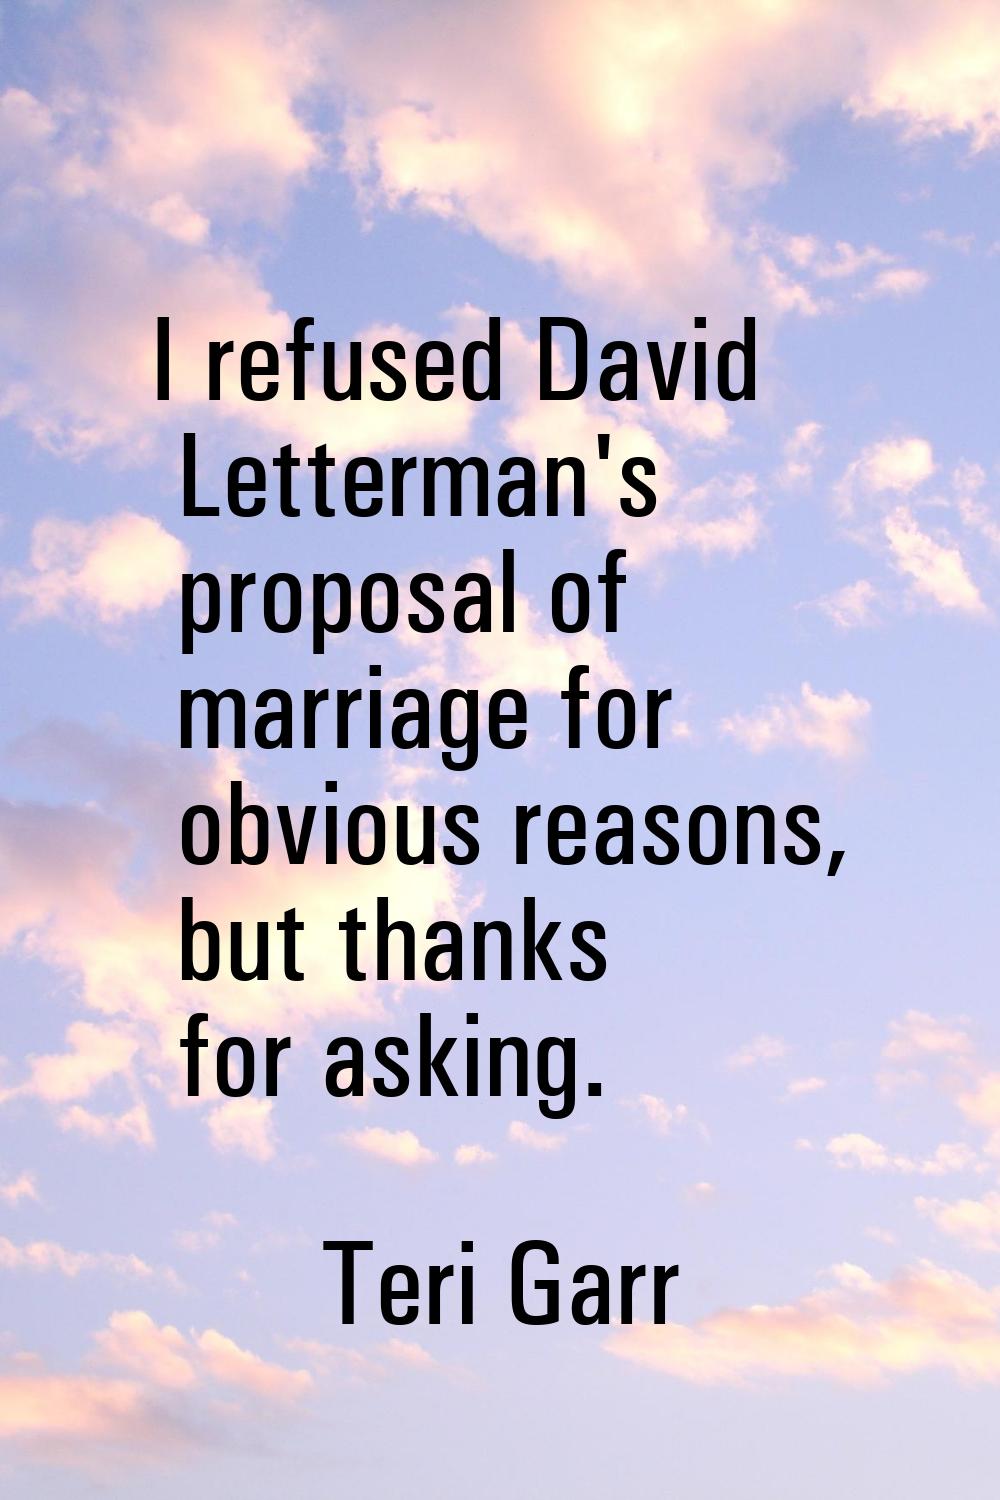 I refused David Letterman's proposal of marriage for obvious reasons, but thanks for asking.